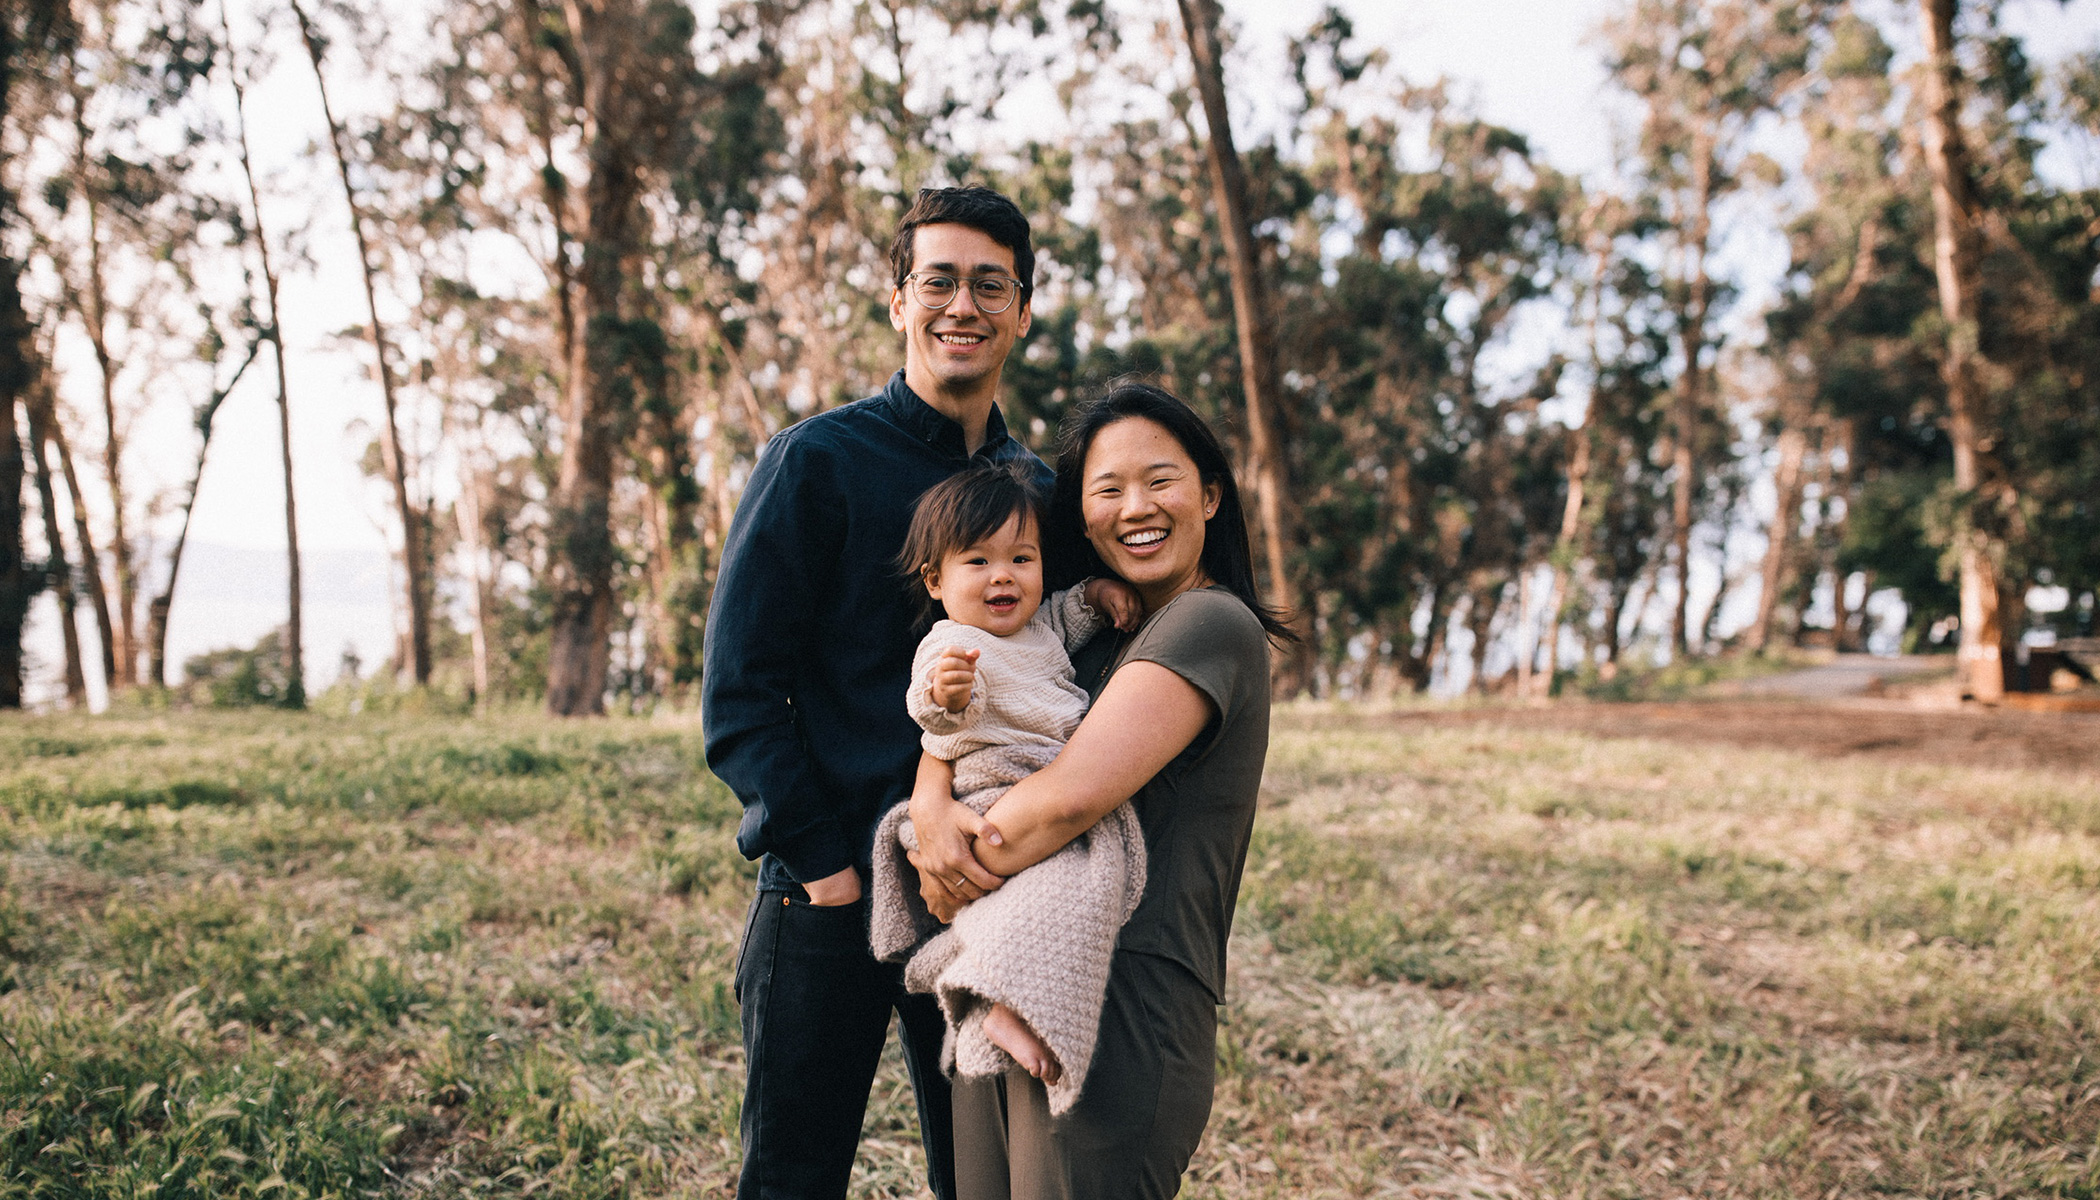 Julio, his spouse and child smile for a picture, surrounded by grass and trees.